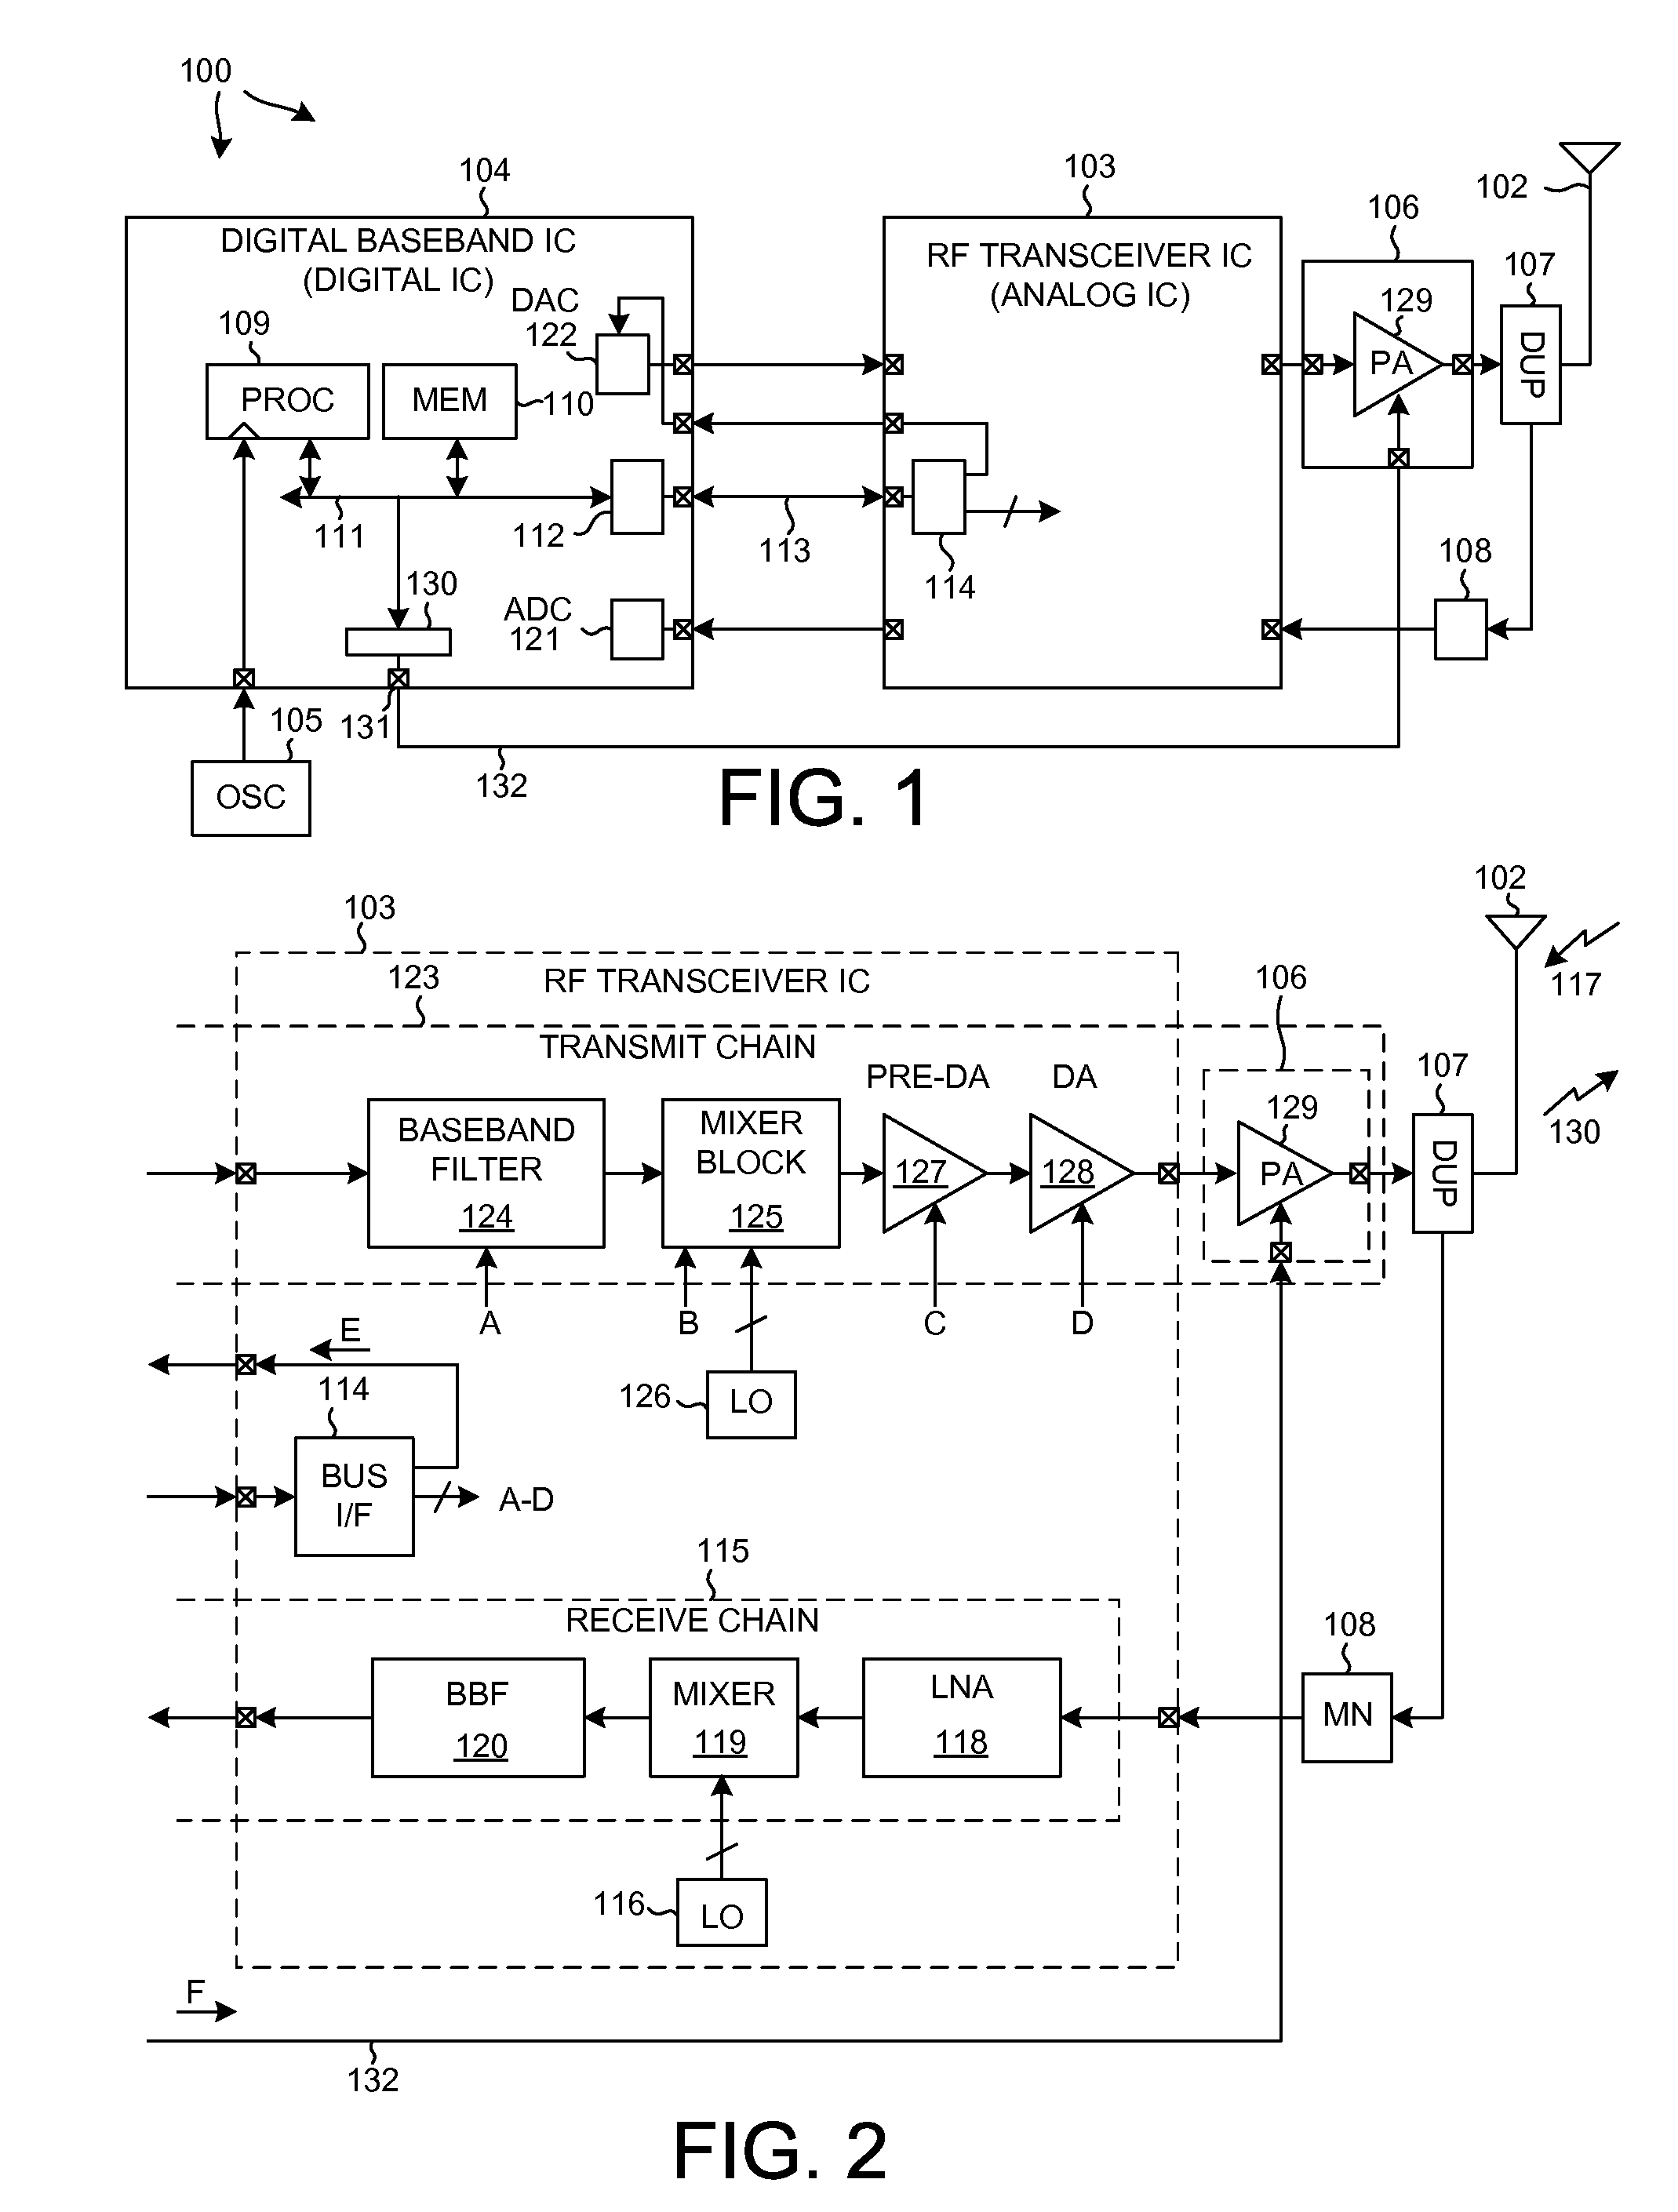 Transmitter chain timing and transmit power control